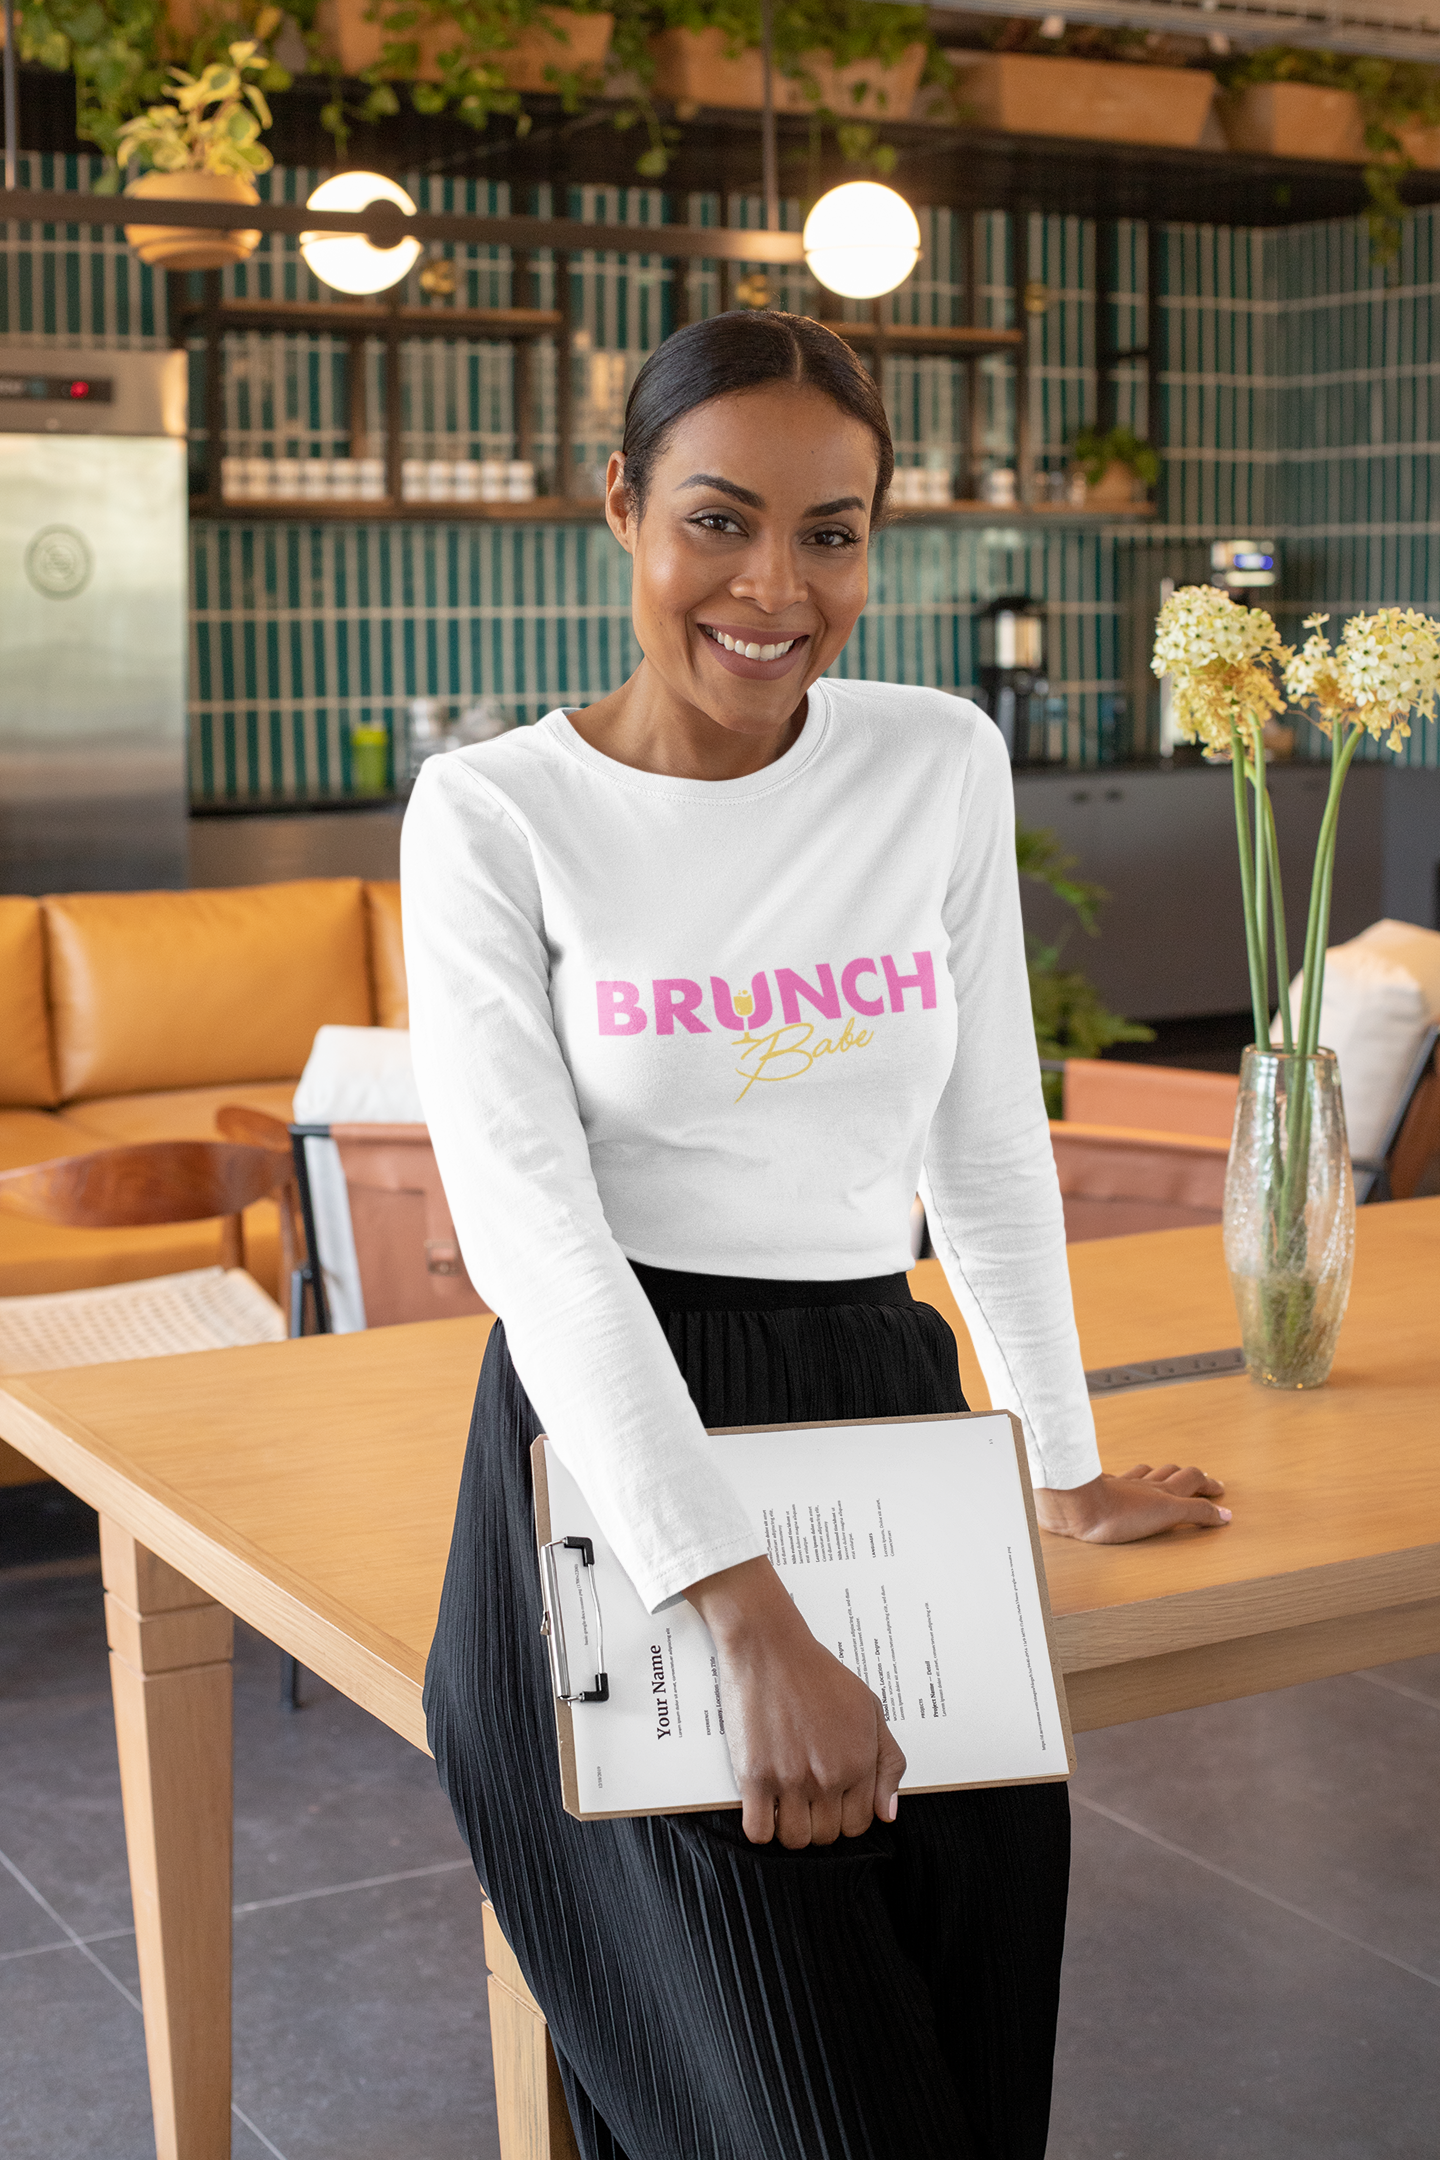 Brunch Babe's Signature Tees